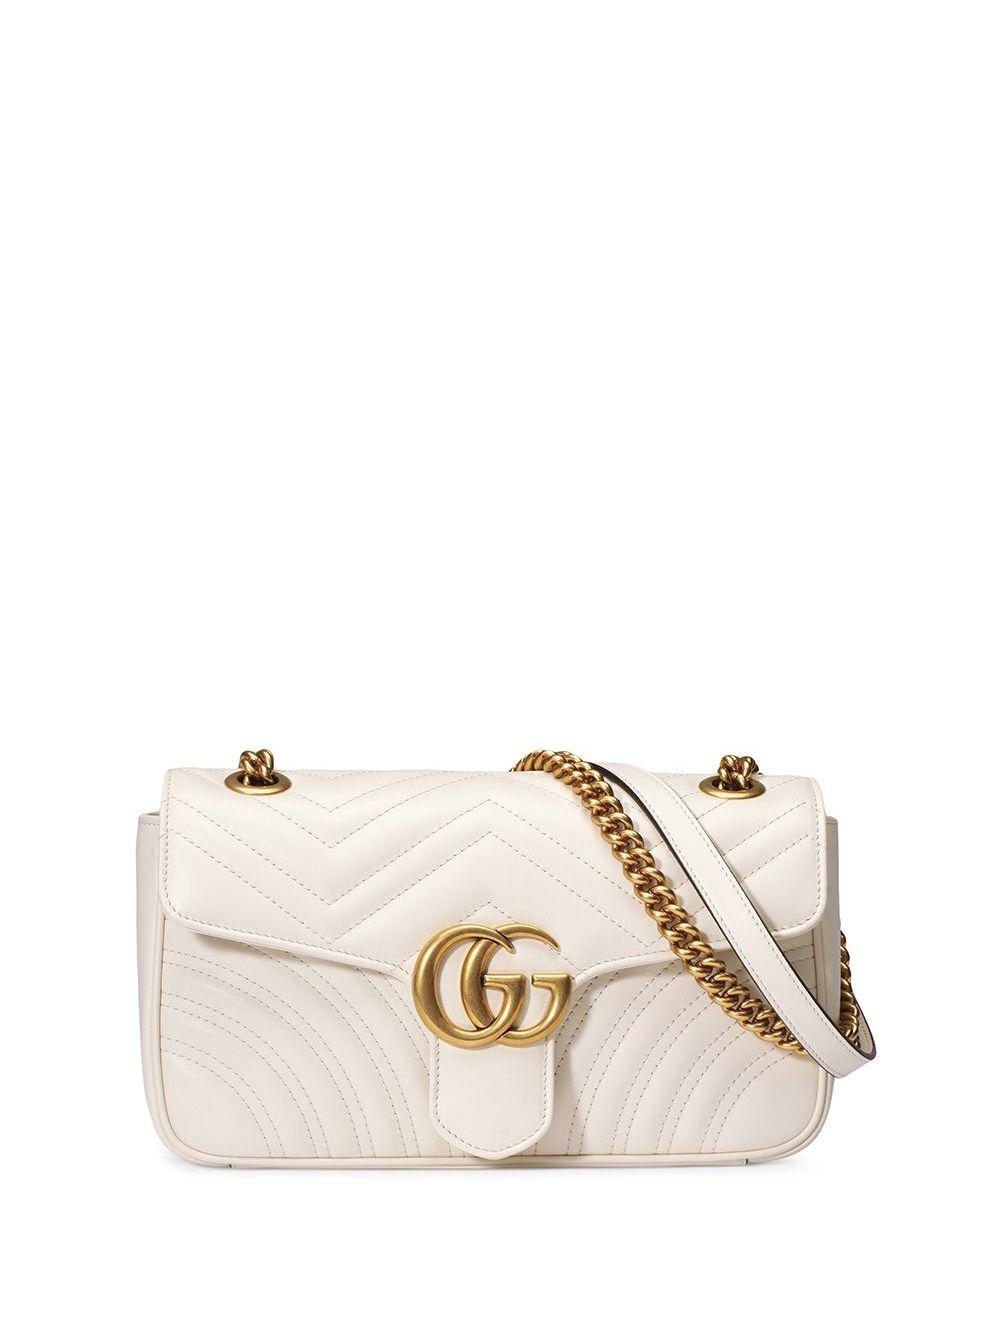 Gucci Leather GG Marmont Small Matelassé Shoulder Bag in White - Lyst